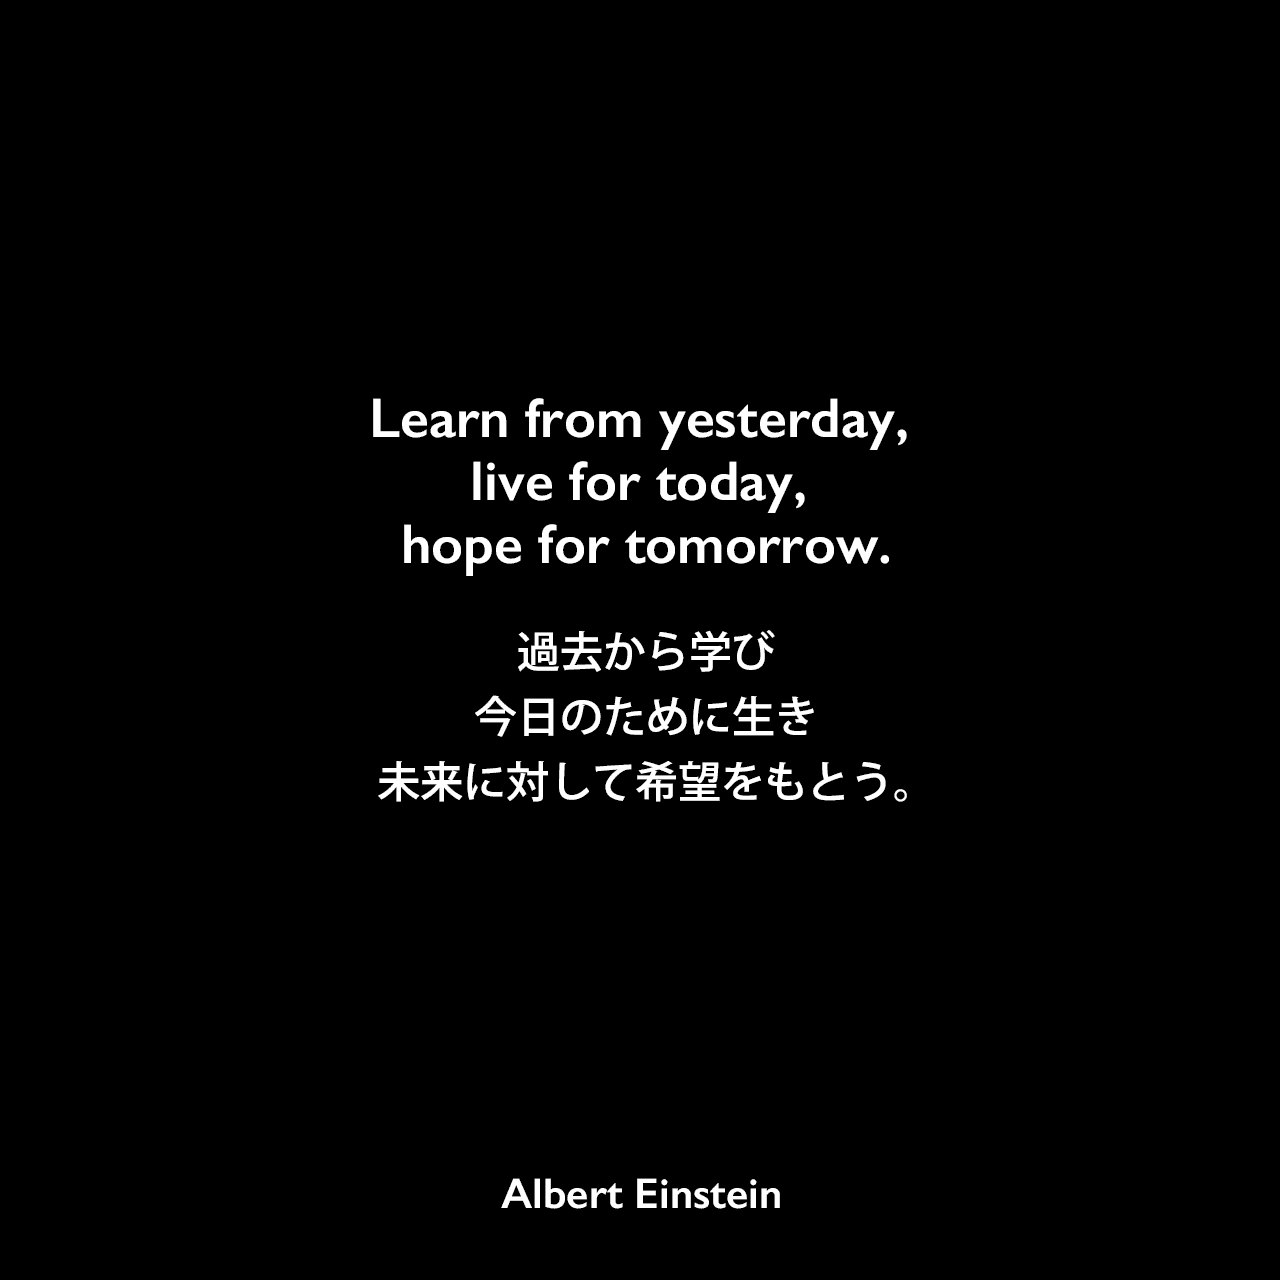 Learn from yesterday, live for today, hope for tomorrow.過去から学び、今日のために生き、未来に対して希望をもとう。Albert Einstein